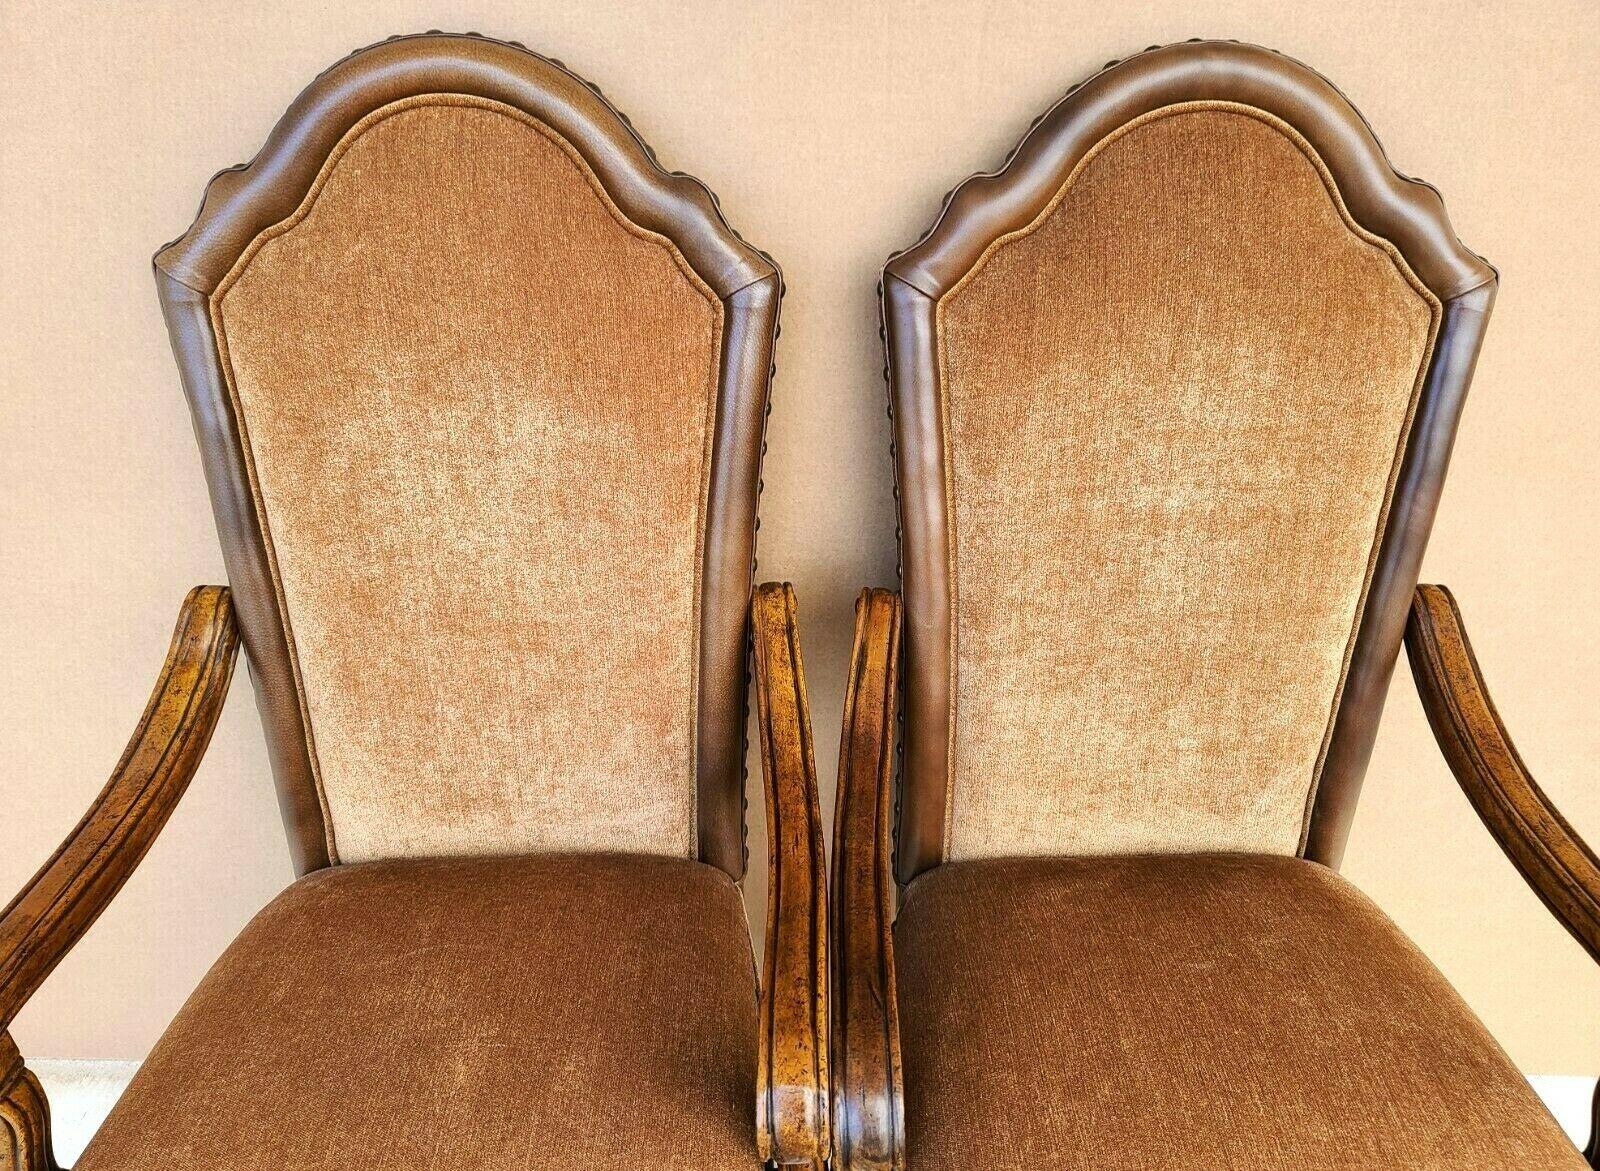 Offering One Of Our Recent Palm Beach Estate Fine Furniture Acquisitions Of A
(2) MICHAEL AMINI Sedgewicke Dining Armchairs
With leather trim and French nail border accents

Approximate Measurements in Inches
44,5